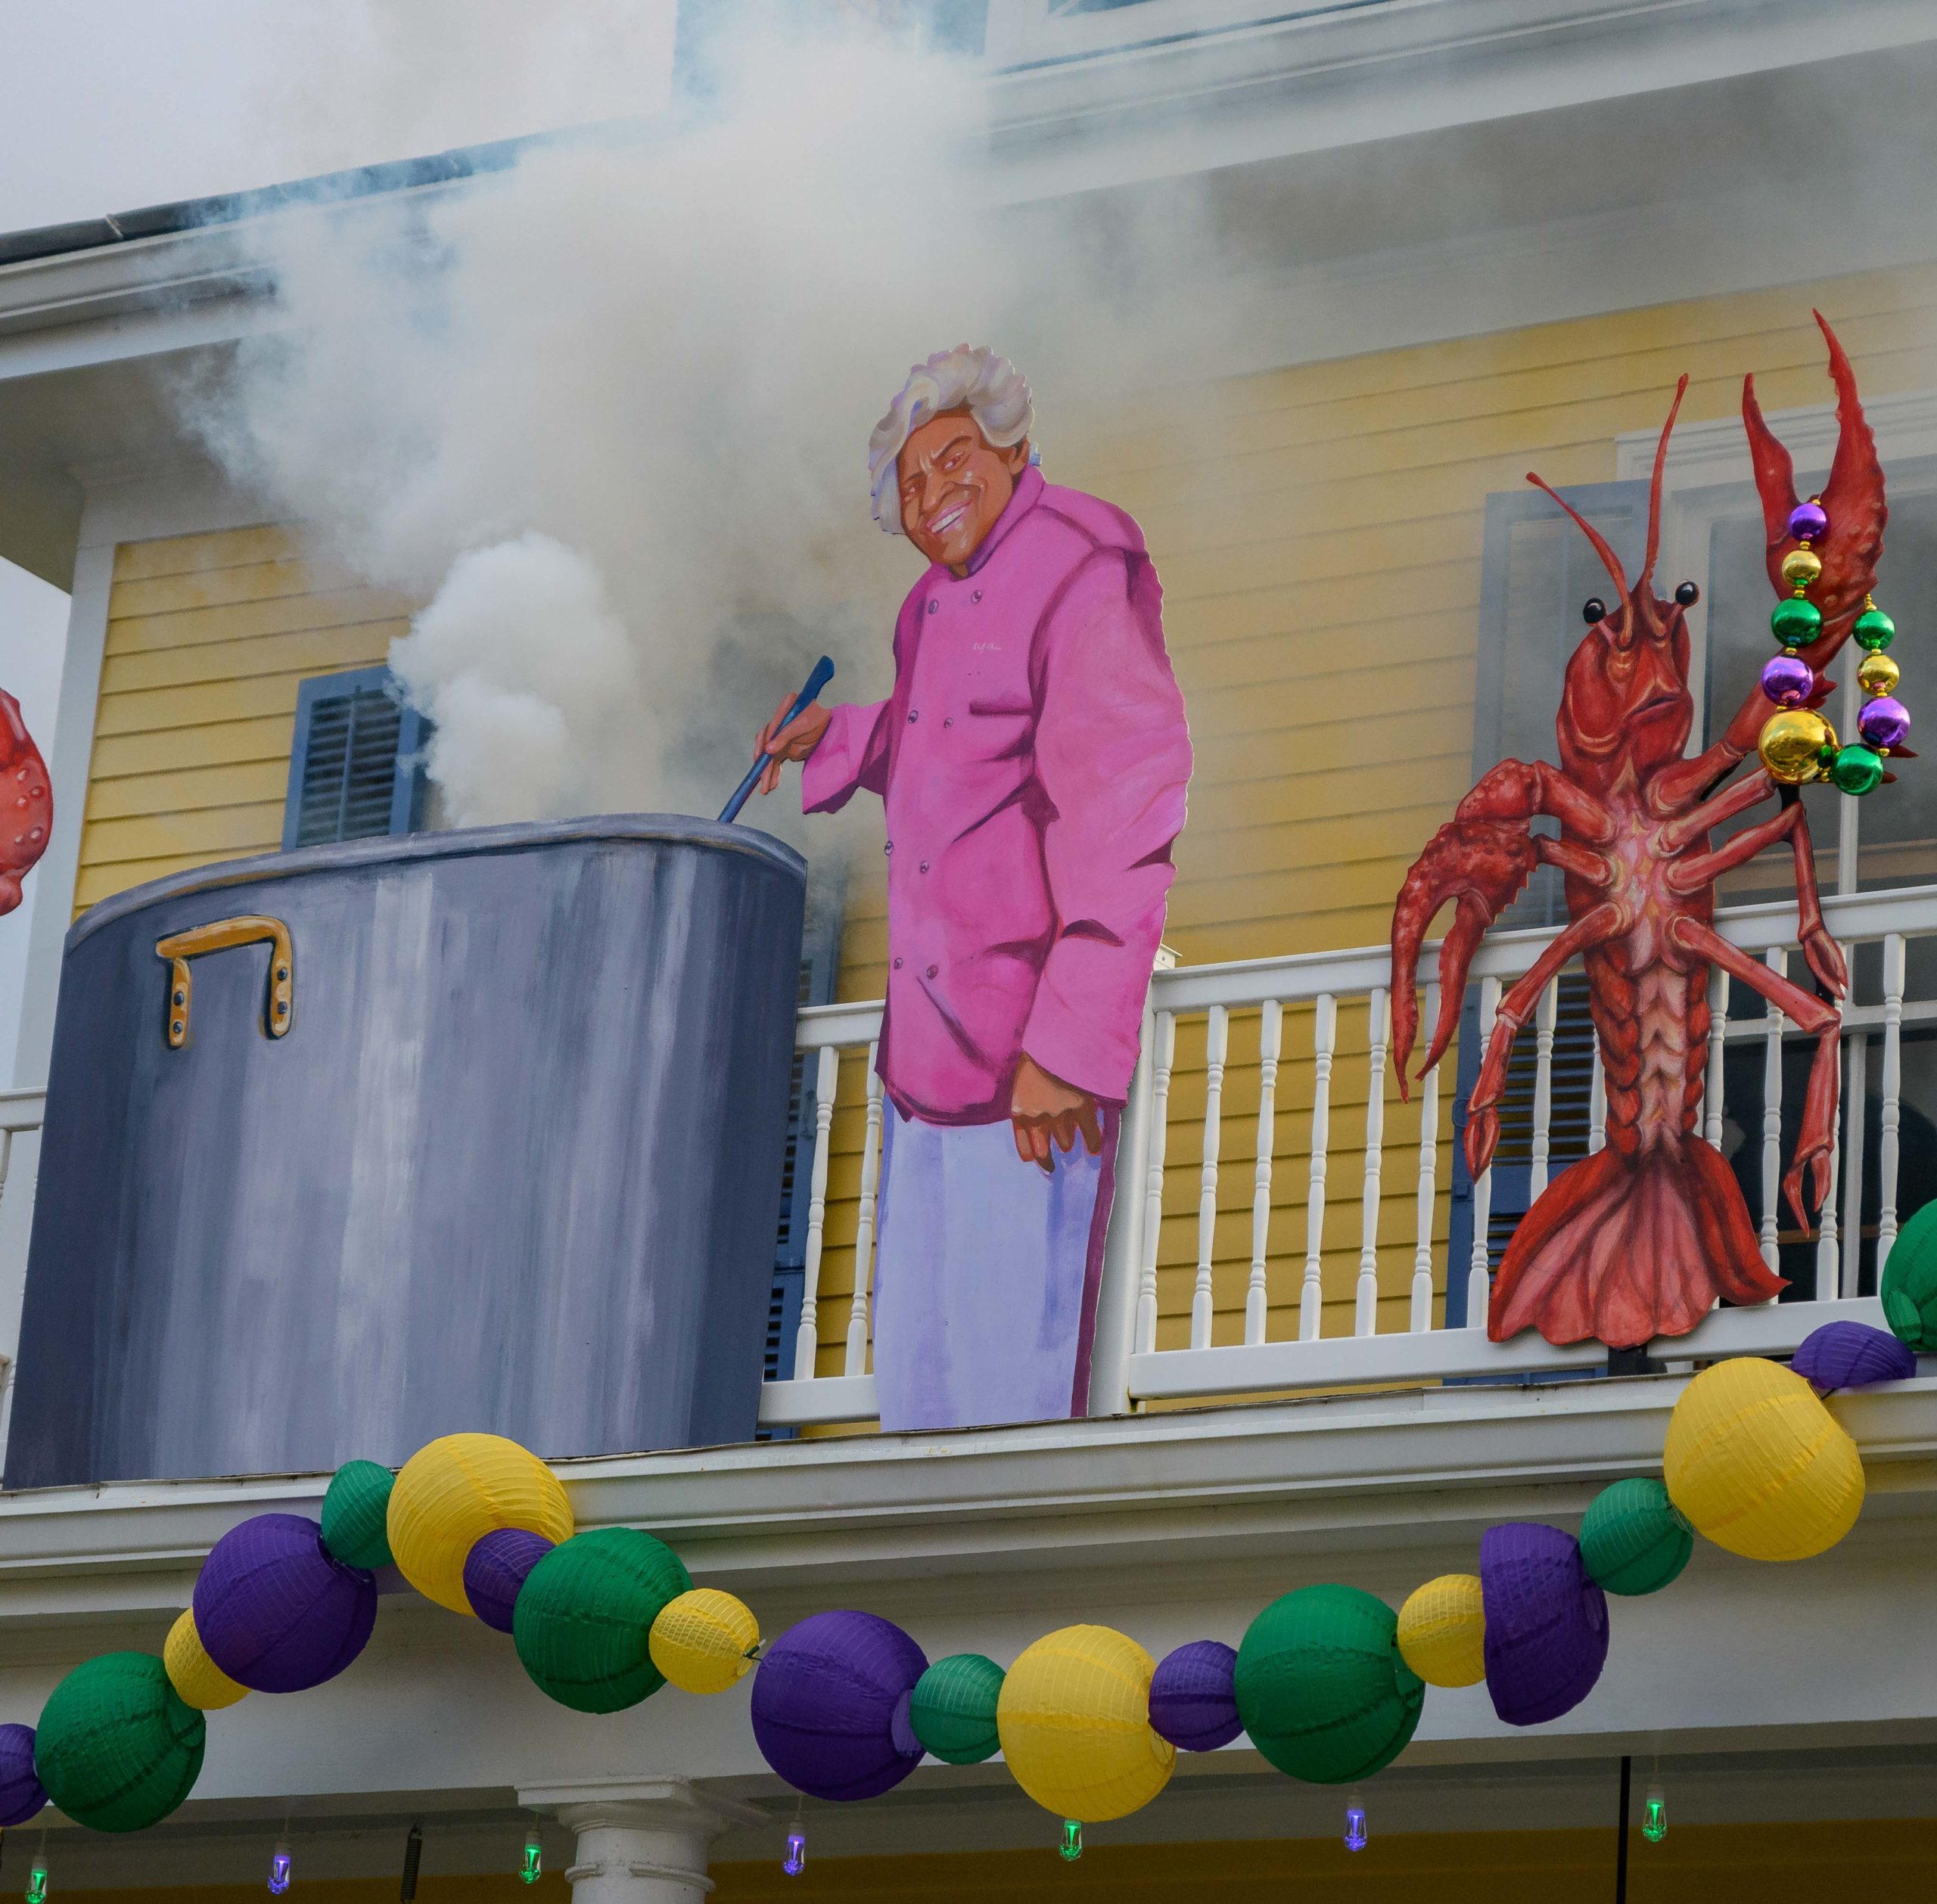 The house at 2918 Bell Street celebrates Chef Leah Chase complete with a smoke machine to simulate her cooking a big pot of gumbo in the Bayou St. John neighborhood in New Orleans, Sunday, Jan. 24, 2021. The house float is home to Mark Douce, his wife Alistair Johnson, and their son Sawyer Douce. The float is part of a theme for the street called “Belles of the Bayou,” celebrating important women in New Orleans history. Other homes on the street celebrate Voodoo practitioner Marie Laveau, singer Mahalia Jackson, and Baroness Pontalba, with others to feature performer Chris Owens and author Anne Rice. The porch decorations were created by the Stronghold Studios, a New Orleans entertainment display prop company, with Douce creating the smoke. Photo by @MattHintonPhoto for @VeryLocalNOLA

#ChefLeahChase #LeahChase #BellesoftheBayou #YardiGras #KreweofHouseFloats @strongholdstudiosnola #MardiGras2021 #MardiGras #VLNOLAMardiGras #Carnival #neworleanslouisiana #nolalife #herenowlouisiana #gonola #onetimeinnola #itsyournola #showmeyournola #nola #followyournola #exploreneworleans #ilovenola #VLNOLA @kreweofhousefloats #Housefloat #porchfloat @dookychaseresteraunt